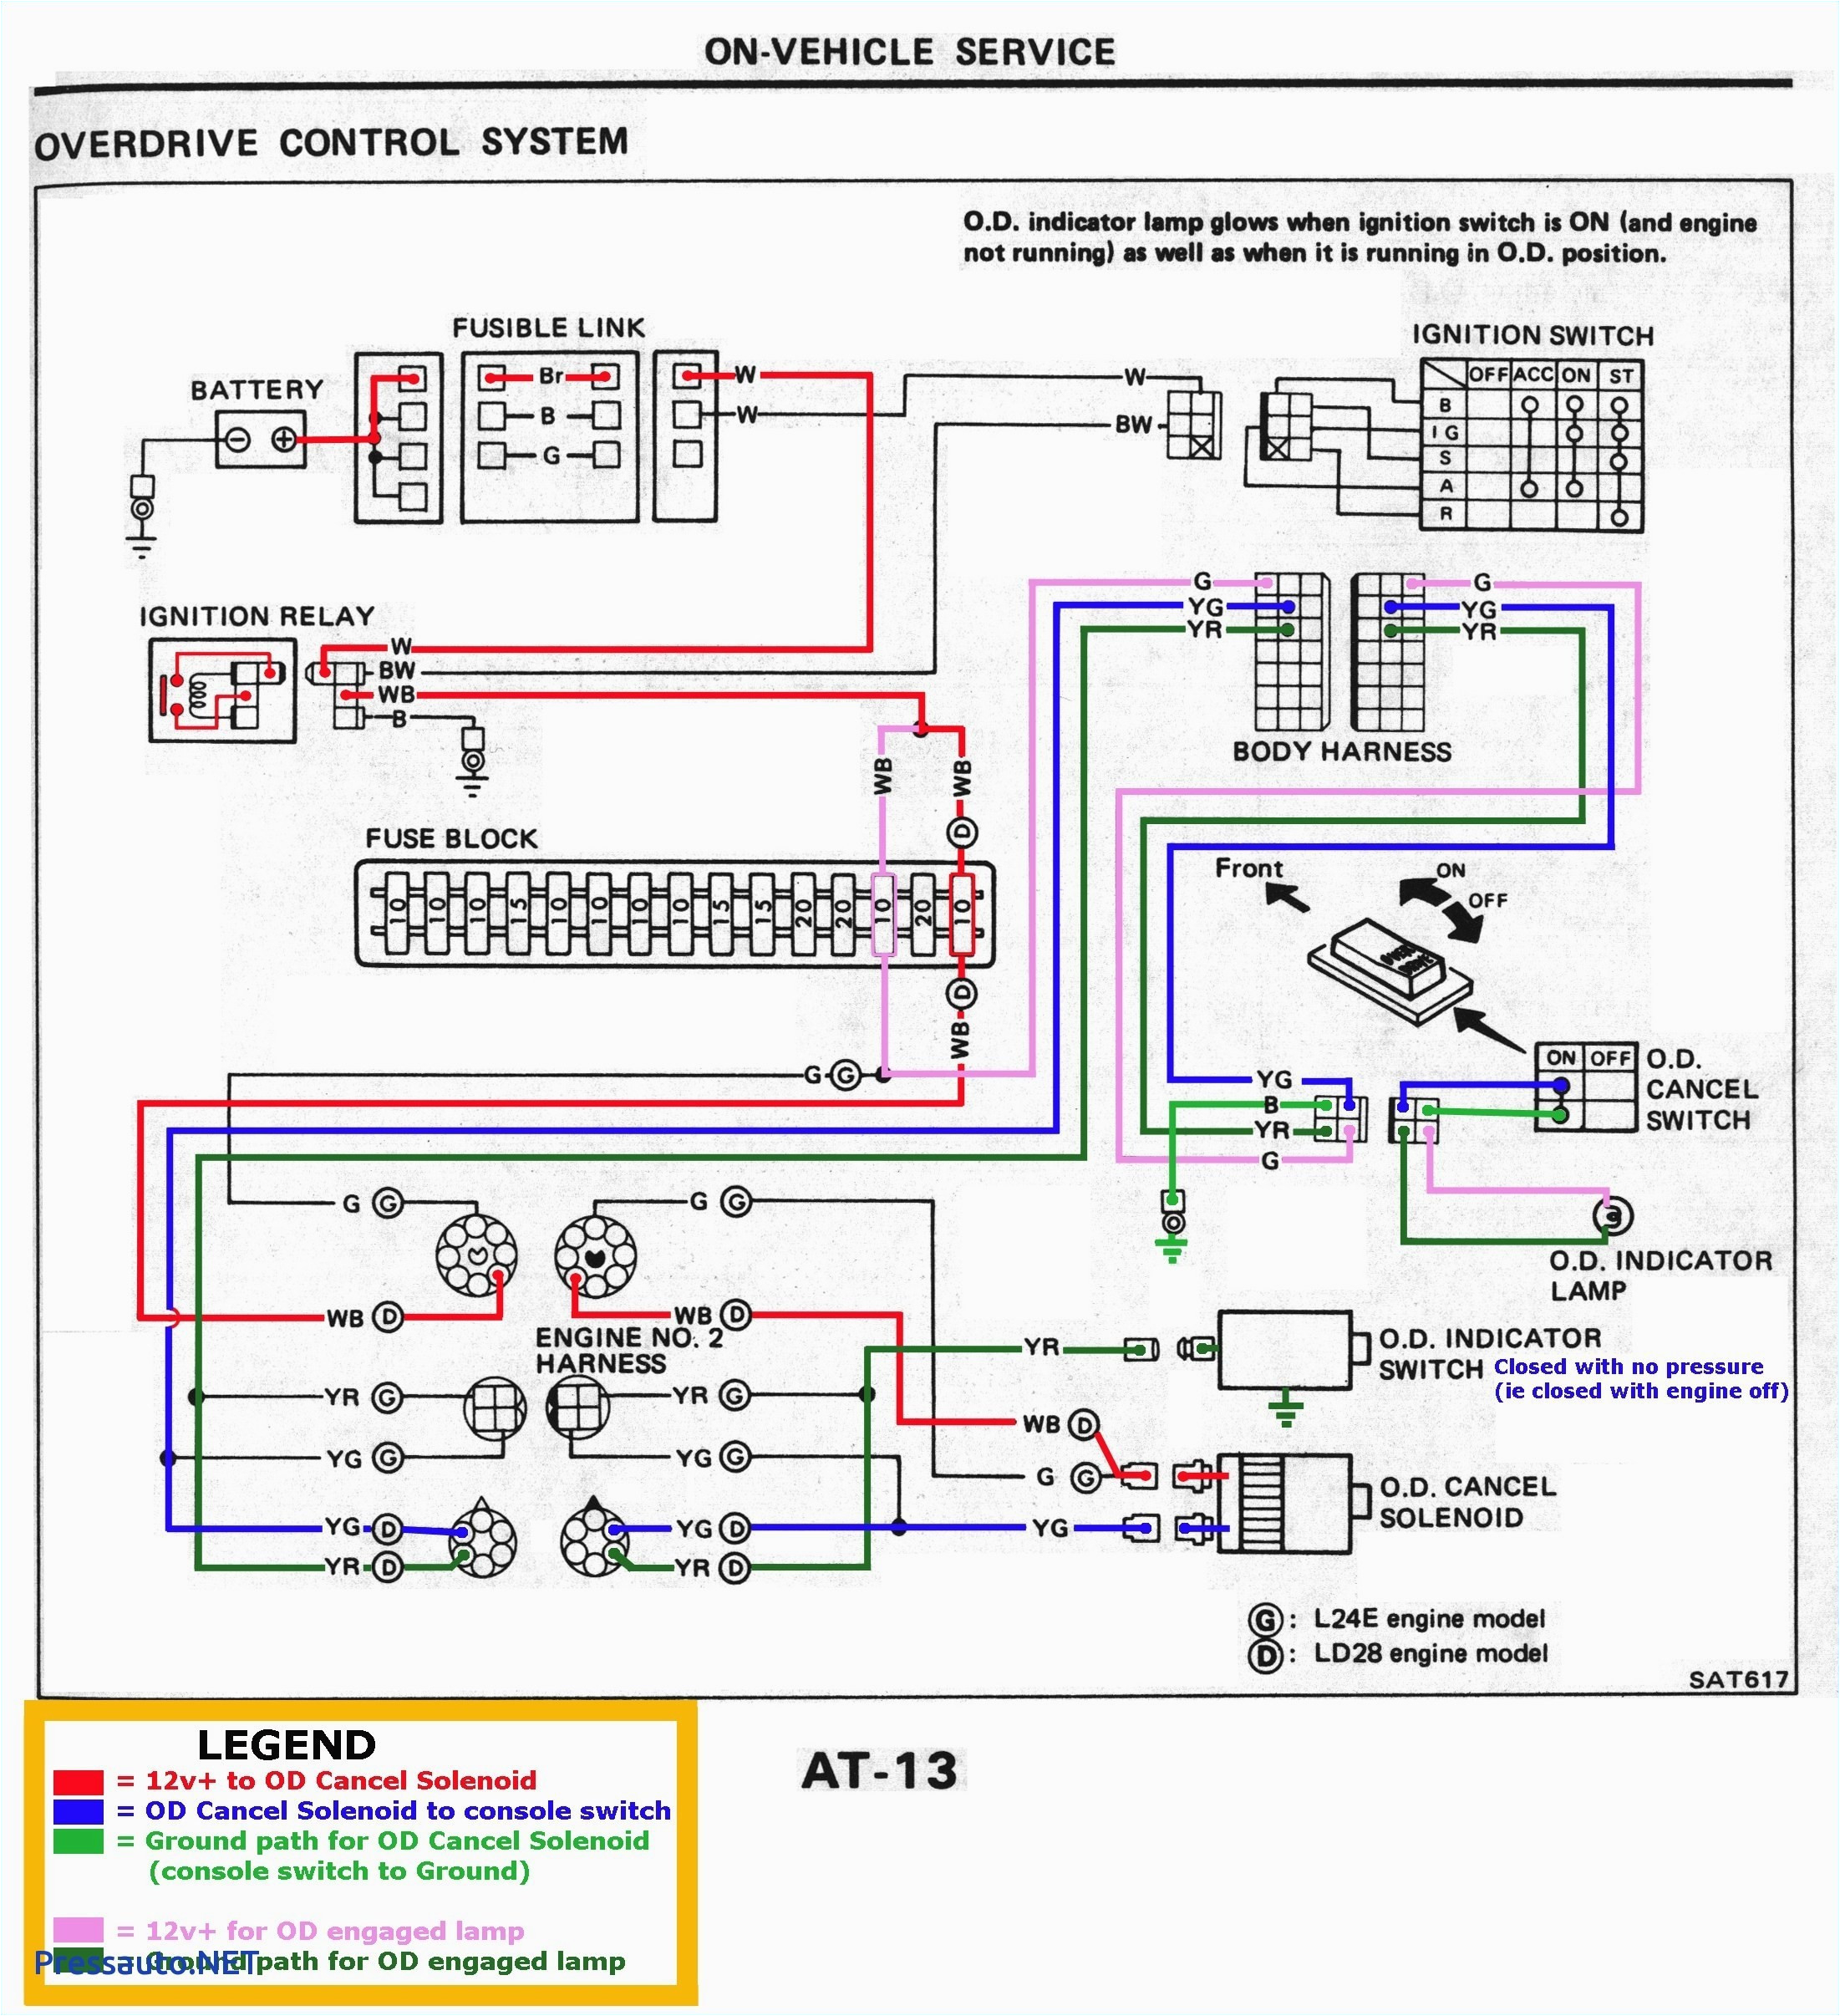 wiring diagram itc 1000f electrical schematic wiring diagram completed 89 bmw wiring diagram wiring diagram site